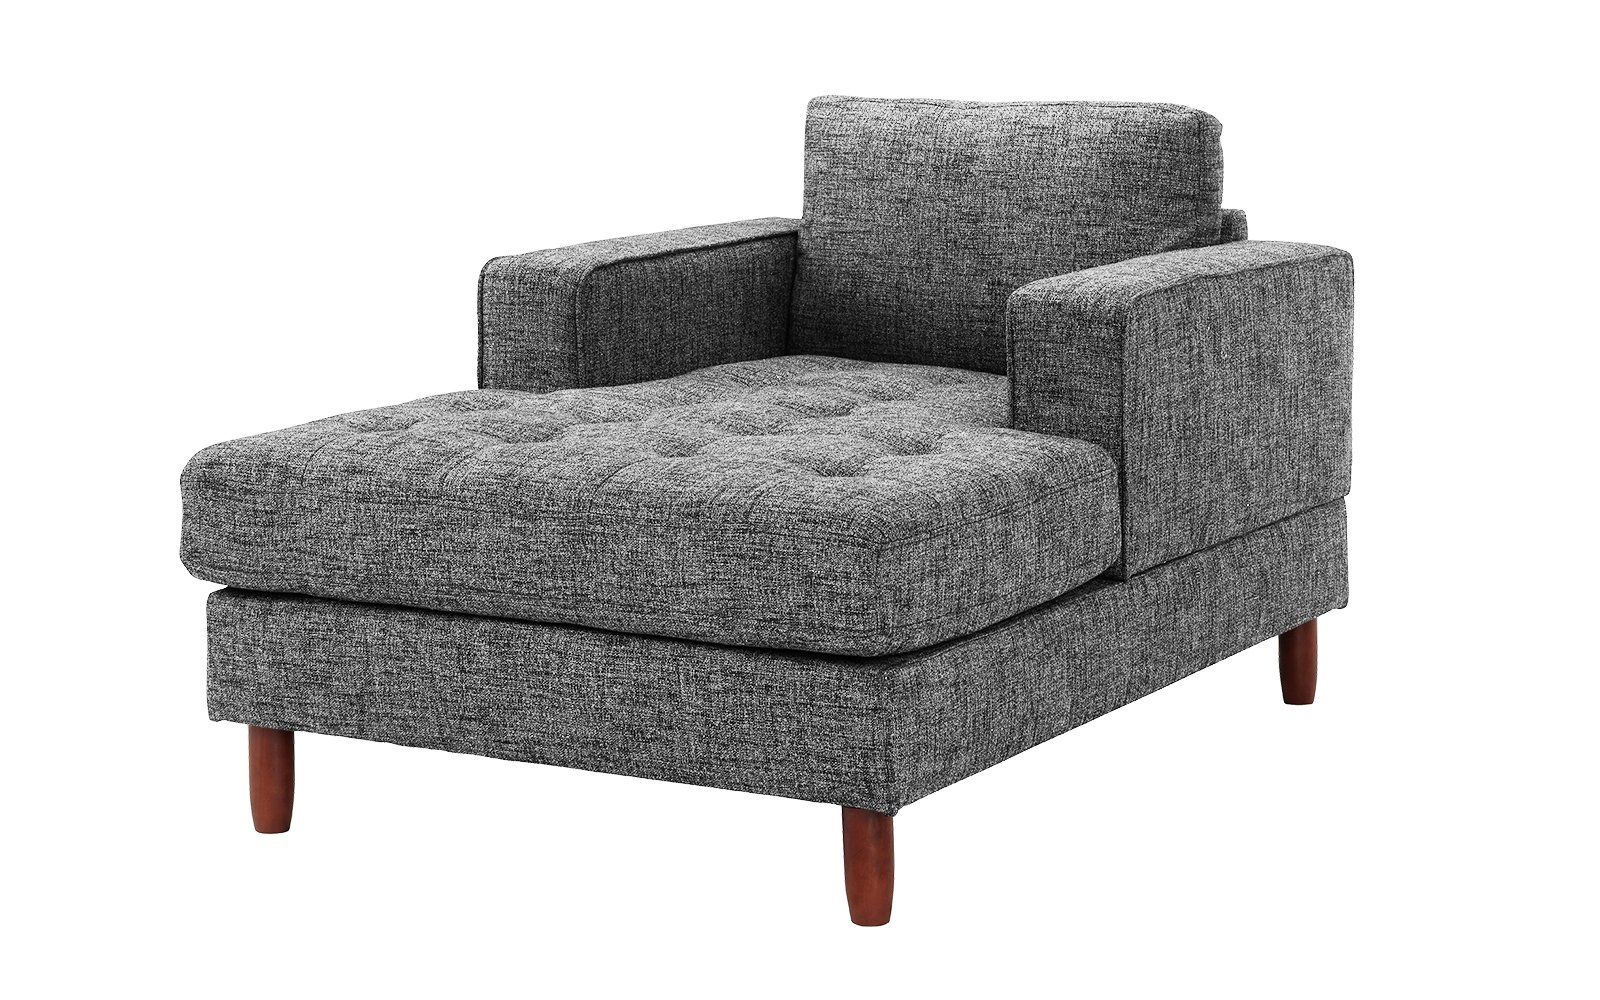 Most Popular Setoril Modern Sectional Sofa Swith Chaise Woven Linen Within Mid Century Modern Linen Fabric Living Room Chaise Lounge (View 14 of 25)